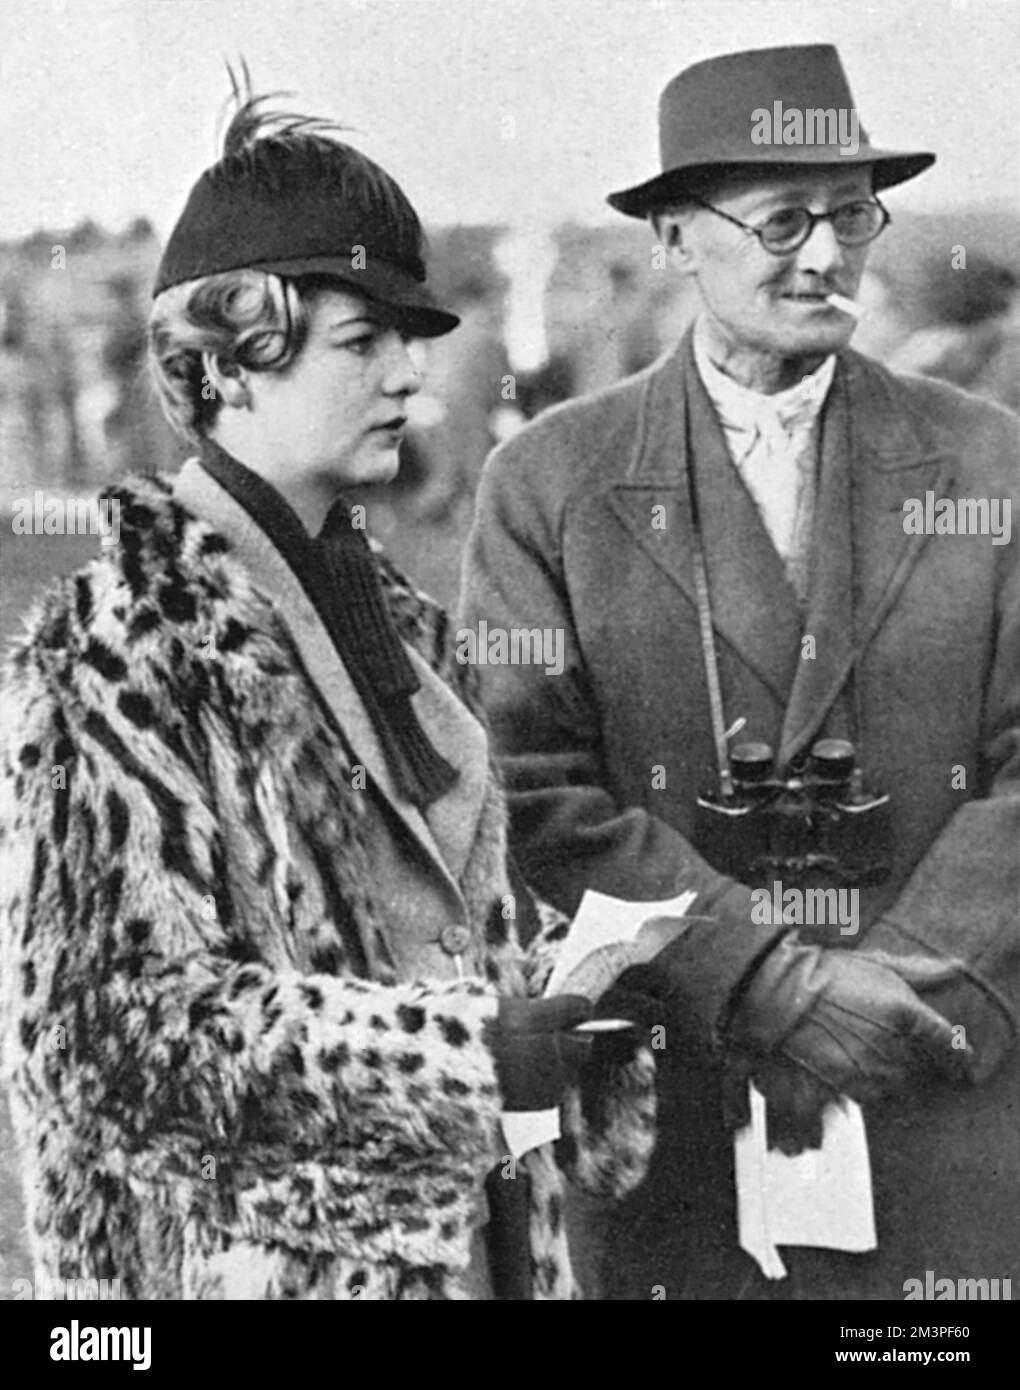 Deborah Mitford (1920-2014), later Duchess of Devonshire, pictured at the age of sixteen (nearly seventeen) in 1937 at Cheltenham races with Mr Dixon.  Debo was the youngest of the infamous six Mitford sisters, daughters of Lord and Lady Redesdale.       Date: 1937 Stock Photo